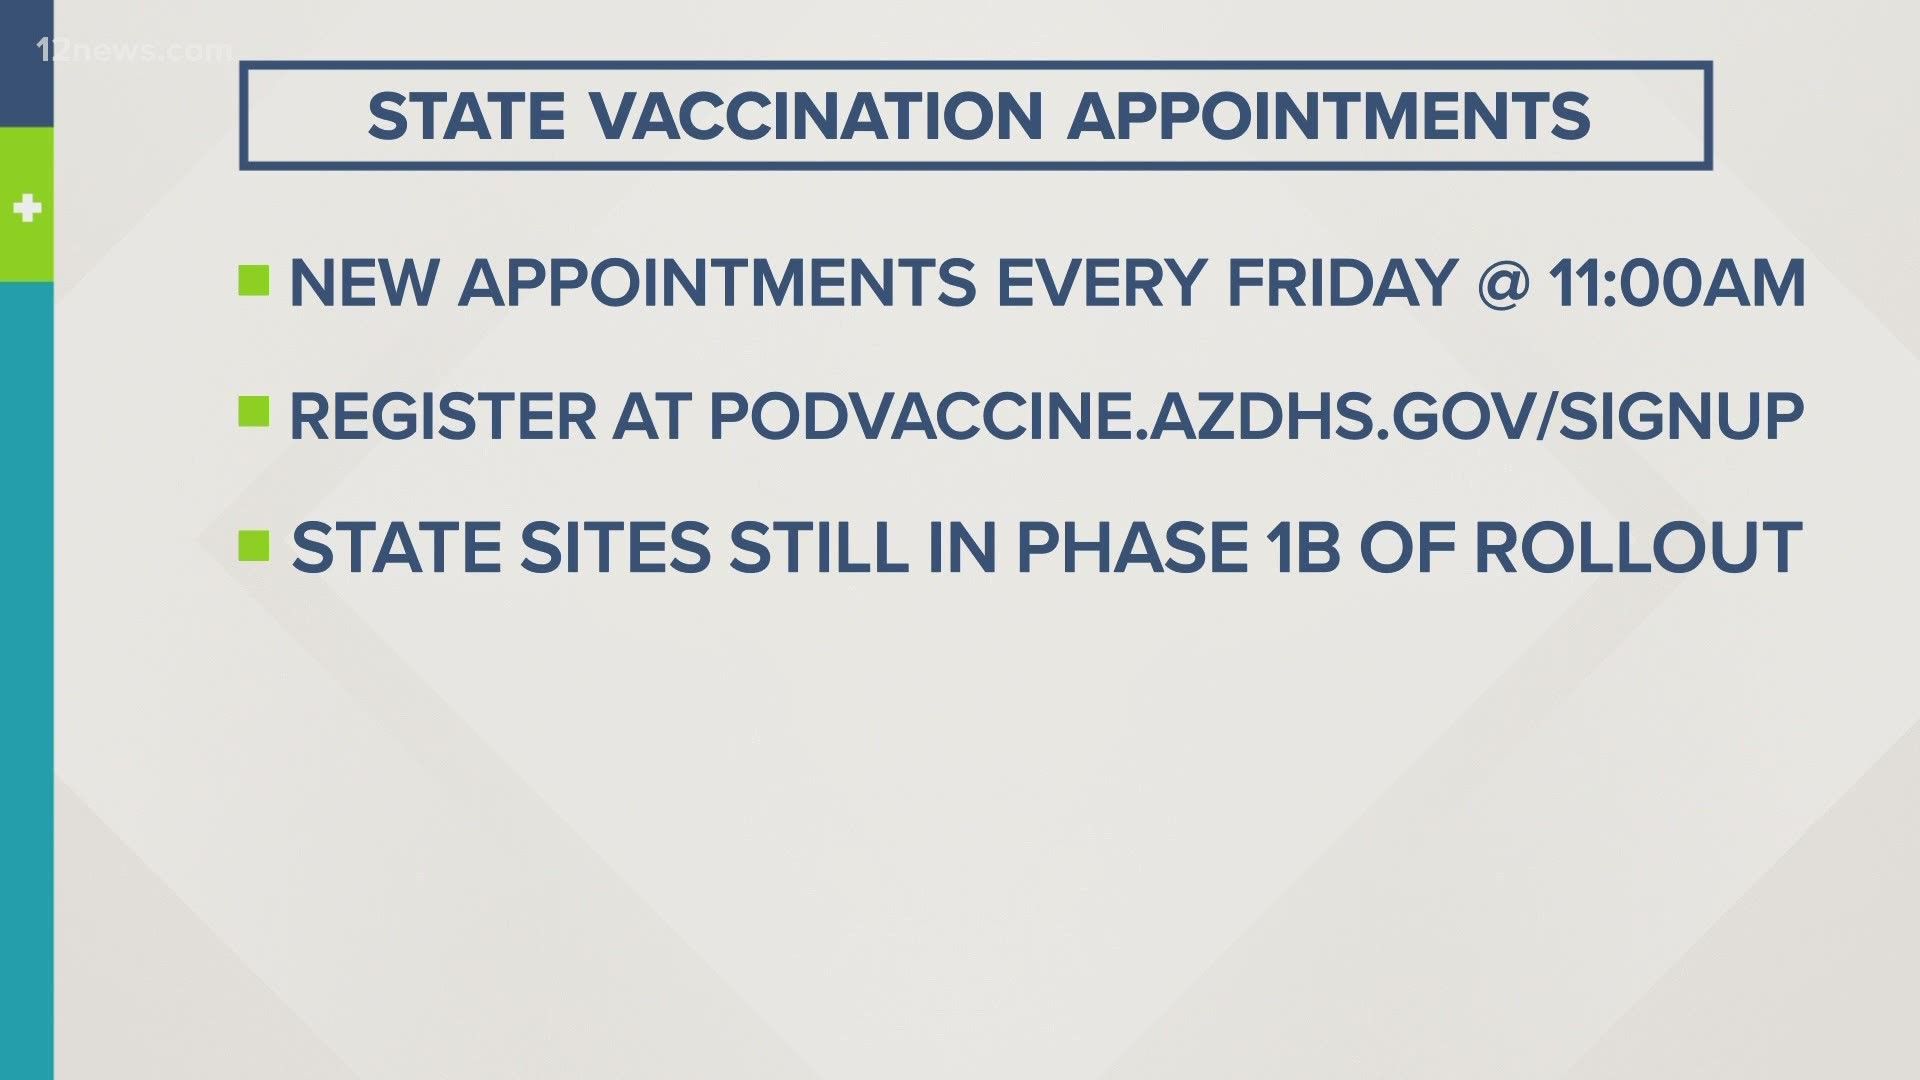 The Arizona Department of Health Services will make new COVID-19 vaccine appointments available each Friday in an effort to get more Arizonans vaccinated.